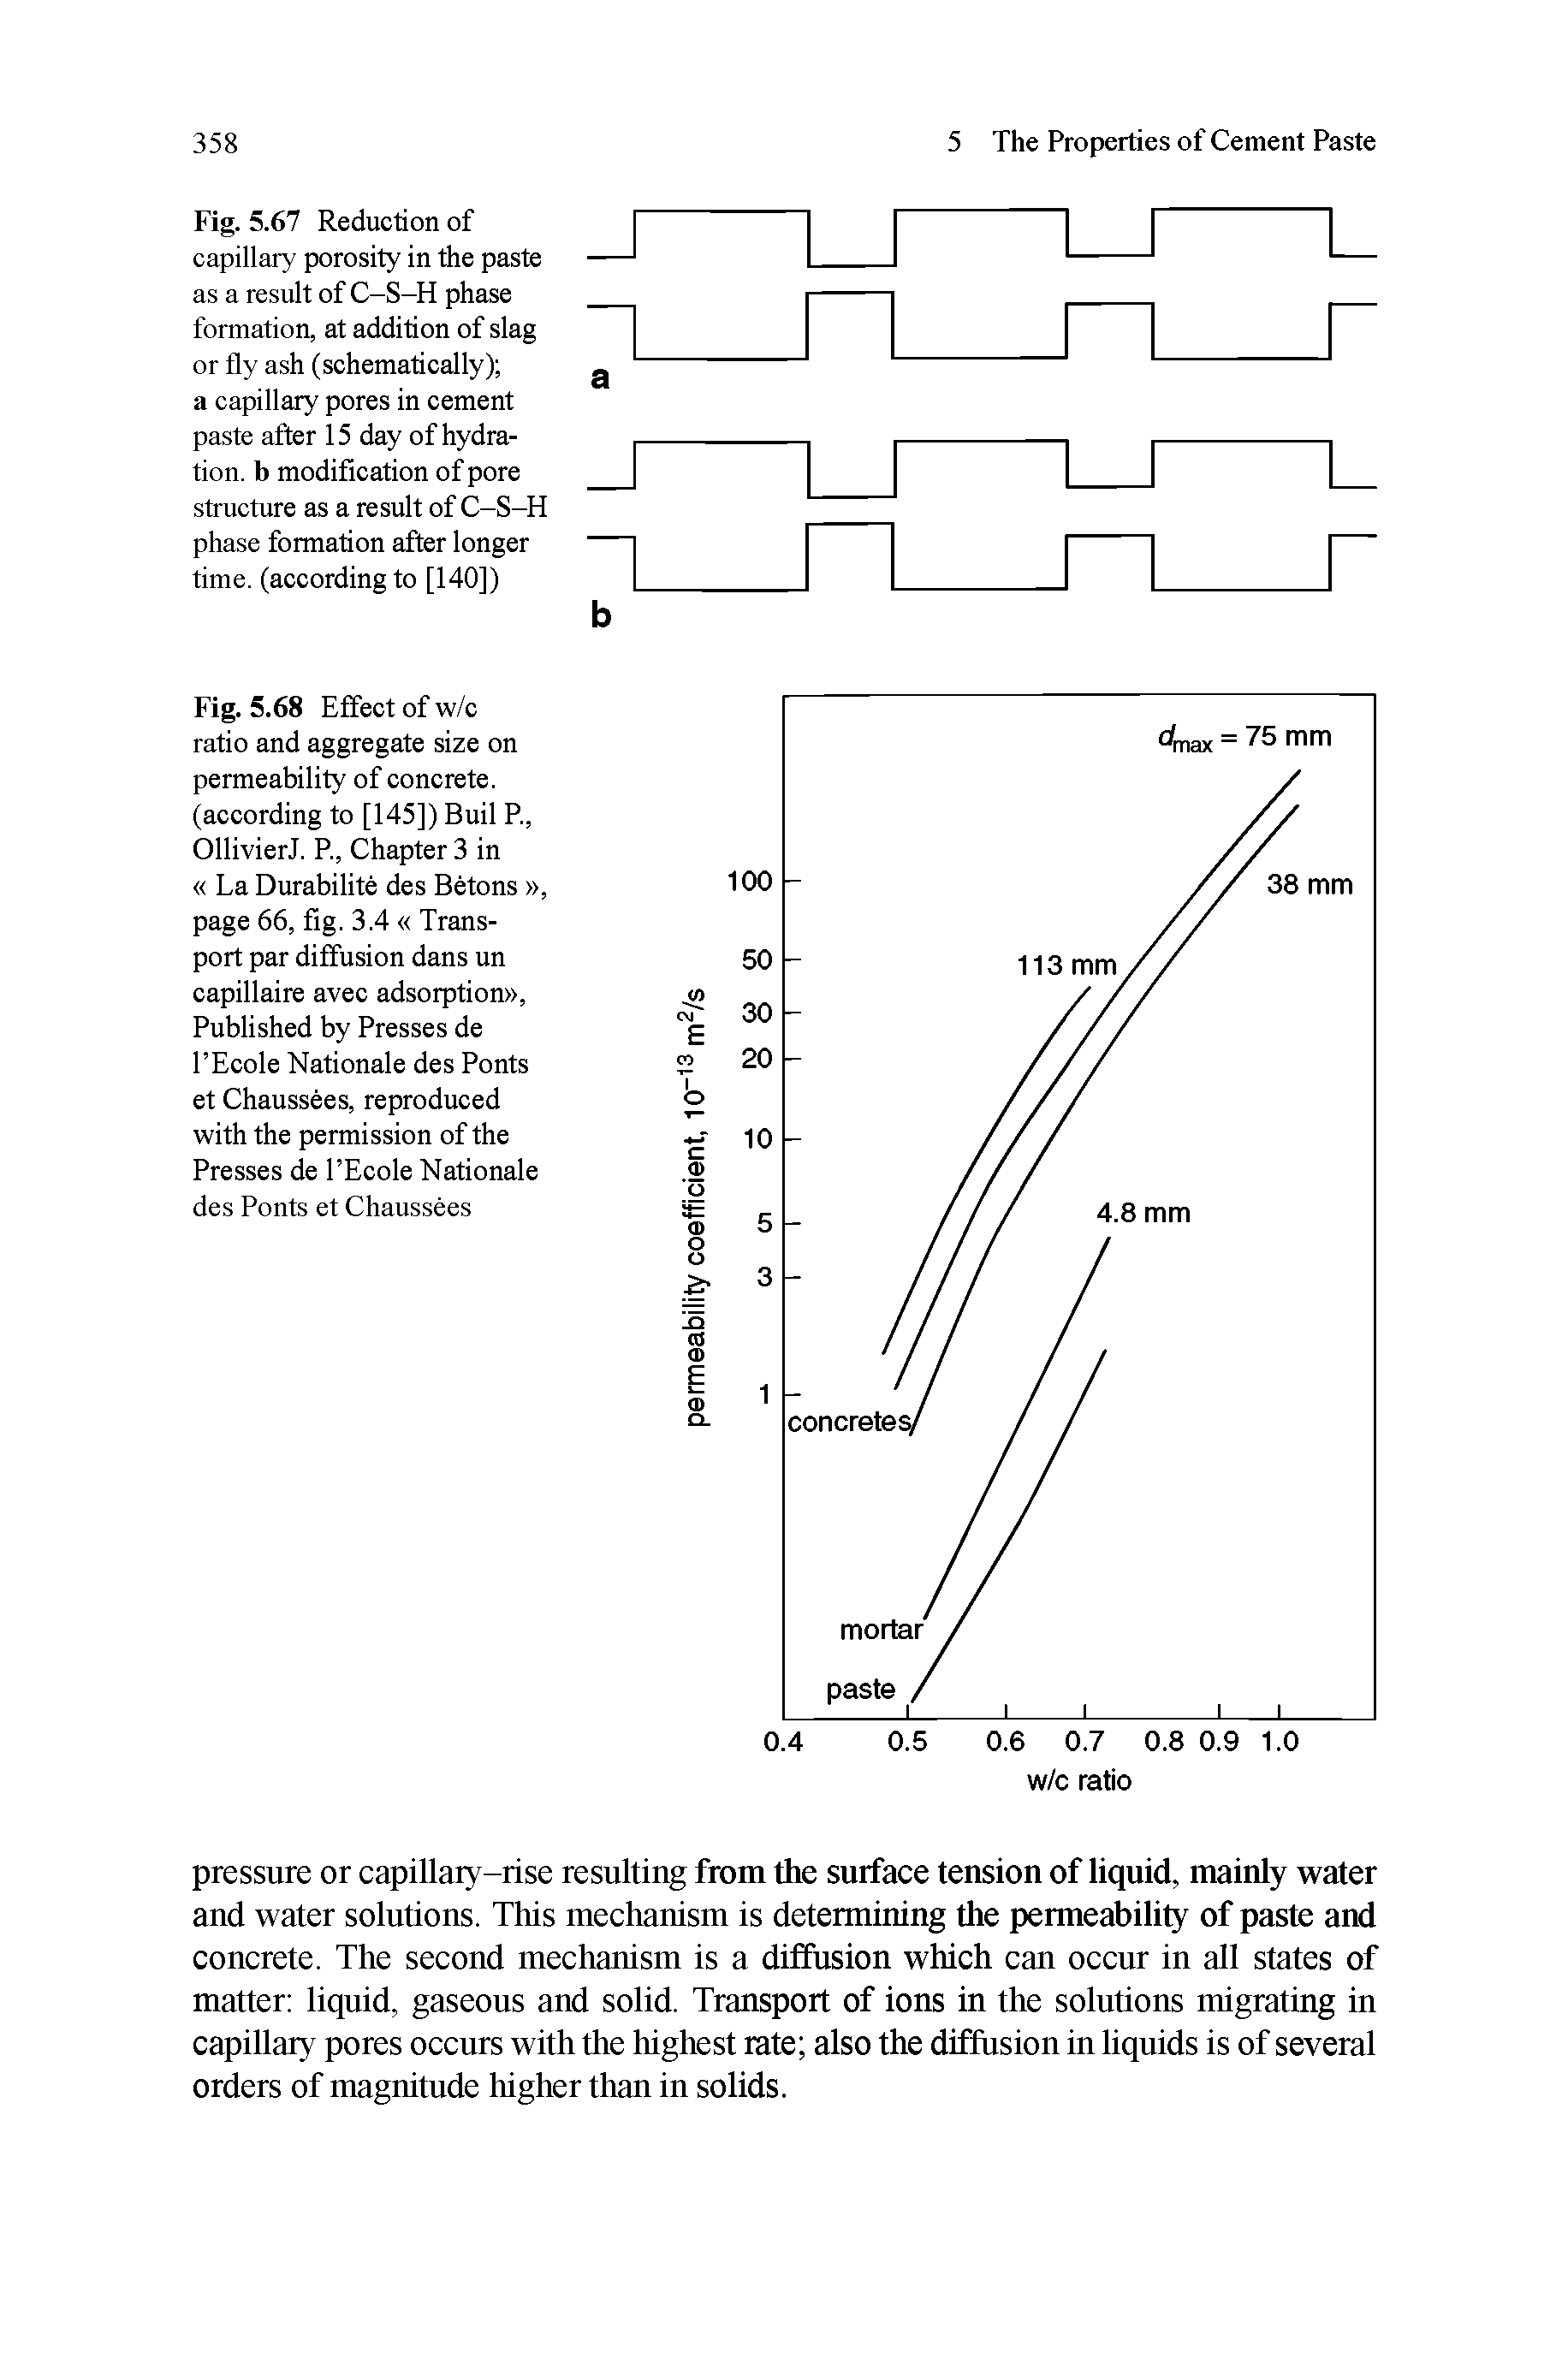 Fig. 5.67 Reduction of capillary porosity in the paste as a result of C-S-H phase formation, at addition of slag or fly ash (schematically) a capillary pores in cement paste after 15 day of hydration. b modification of pore structure as a result of C-S-H phase formation after longer time, (according to [140])...